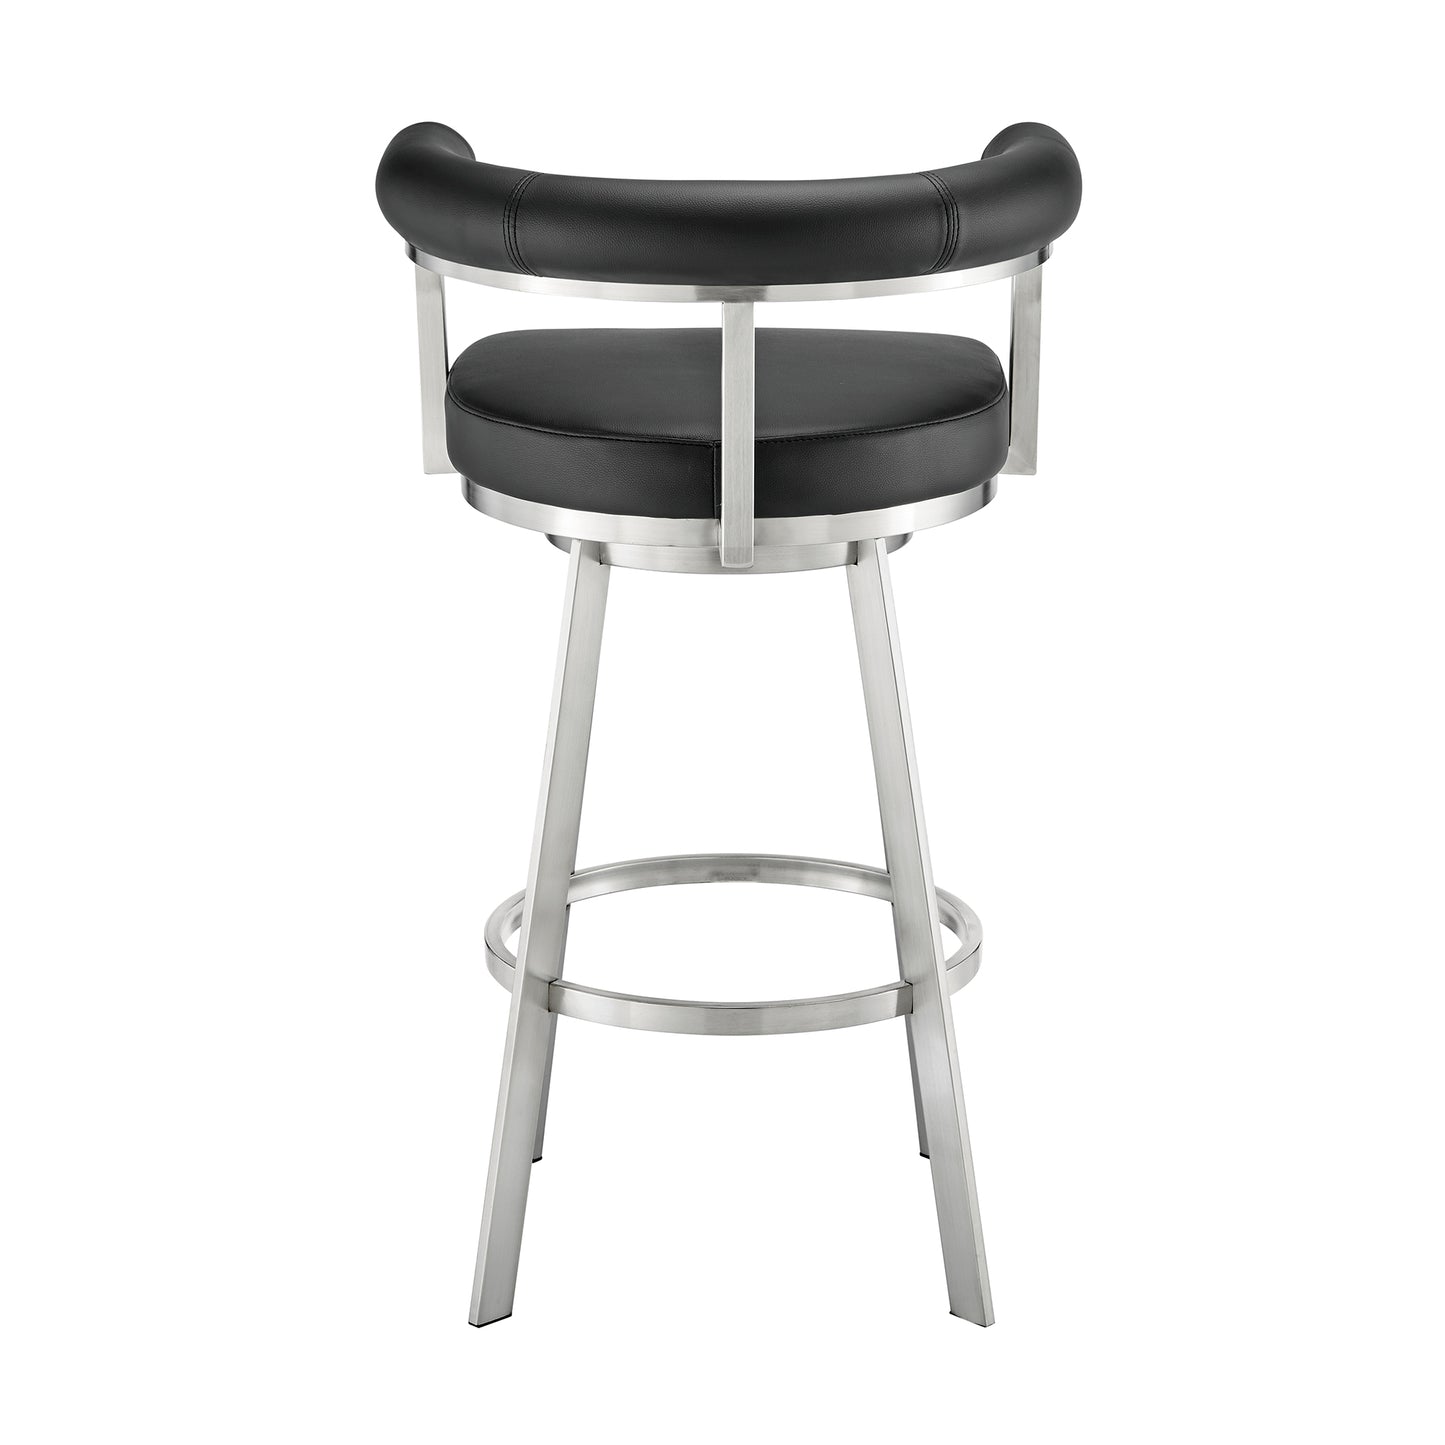 Magnolia 26" Swivel Counter Stool in Brushed Stainless Steel with Black Faux Leather